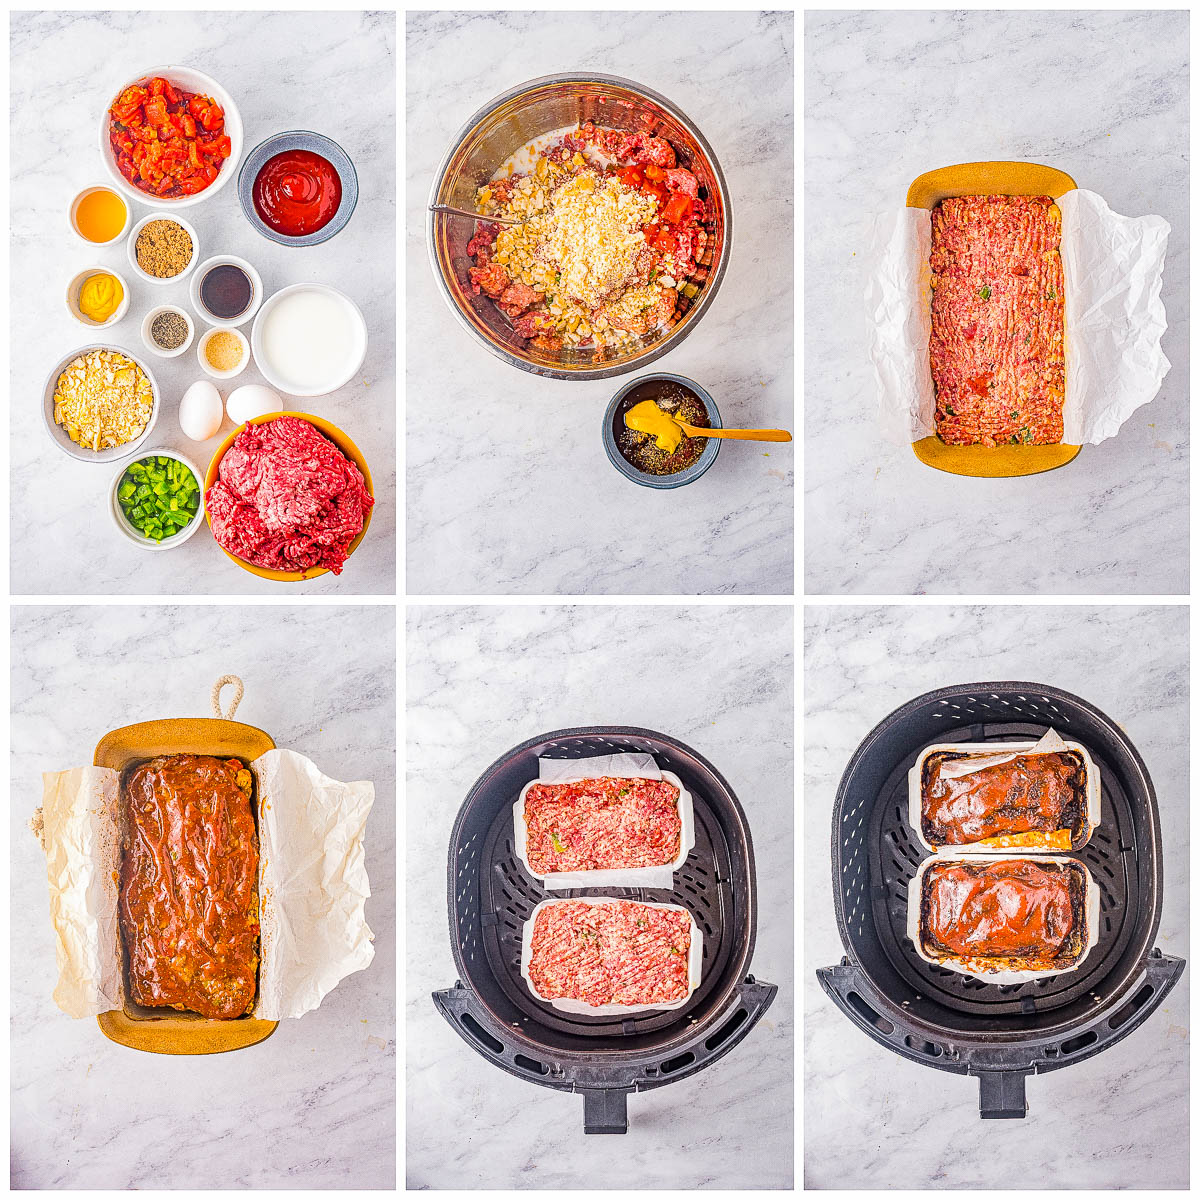 Cracker Barrel Meatloaf – This Cracker Barrel meatloaf copycat is tender, juicy, made with the restaurant’s secret ingredients, glazed to tangy-sweet perfection, and sure to become a family FAVORITE comfort food dinner recipe! Air fryer AND oven baking options provided.